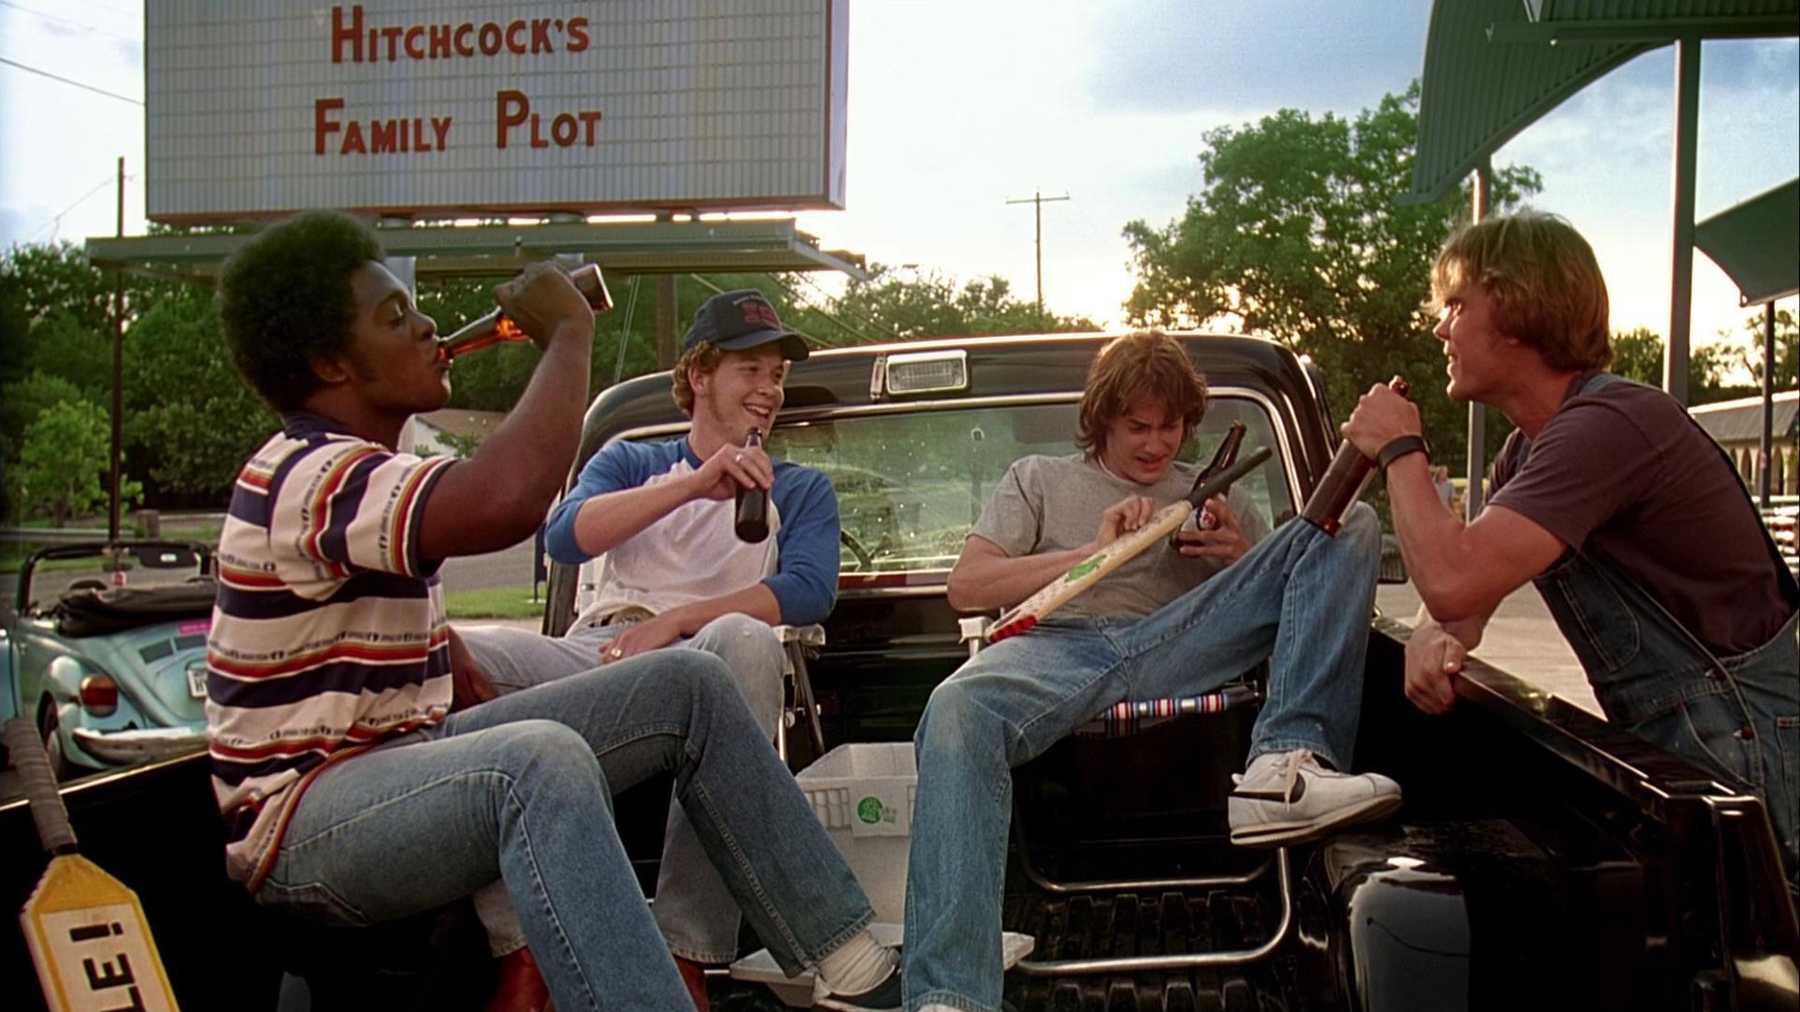 Melvin (Jason O. Smith), Benny (Cole Hauser), Pink (Jason London), and Don (Sasha Jenson) sit in the back of a pickup truck drinking beers and chatting.